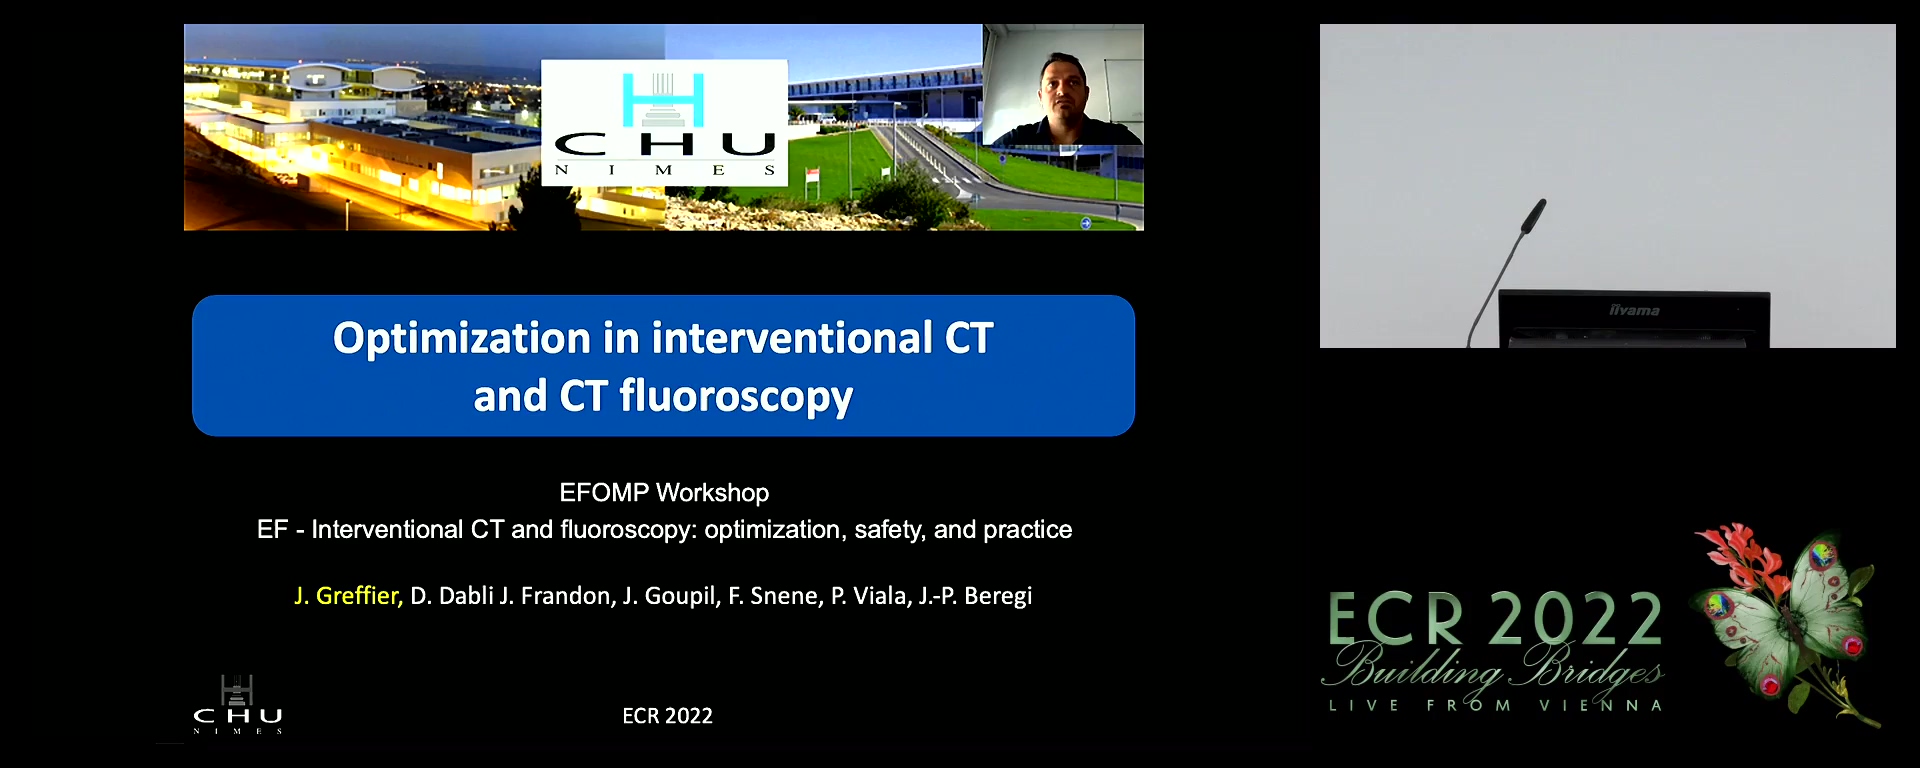 Optimisation in interventional CT and CT fluoroscopy